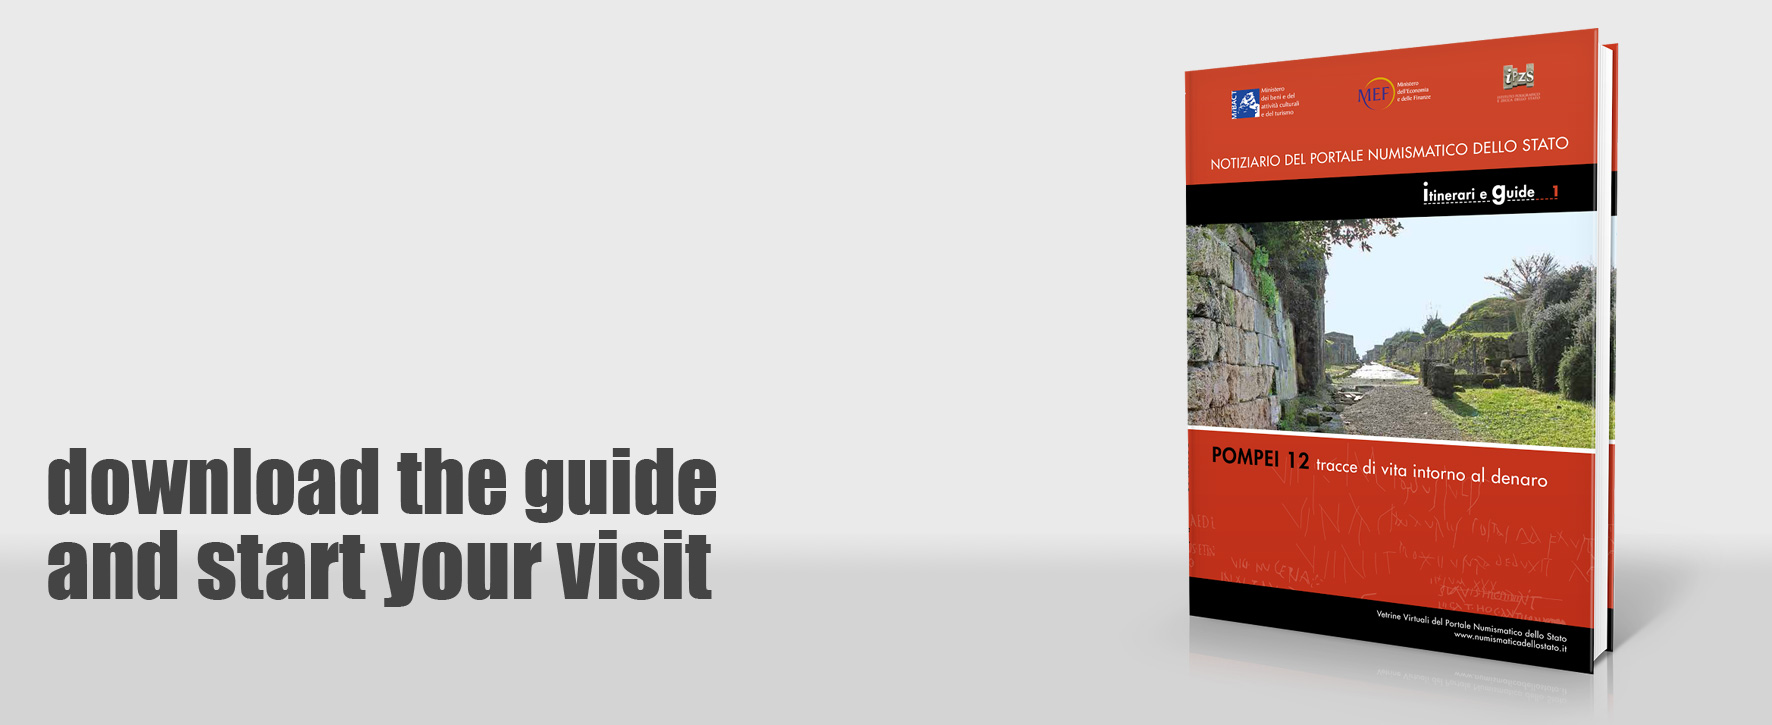 download the guide and start your visit